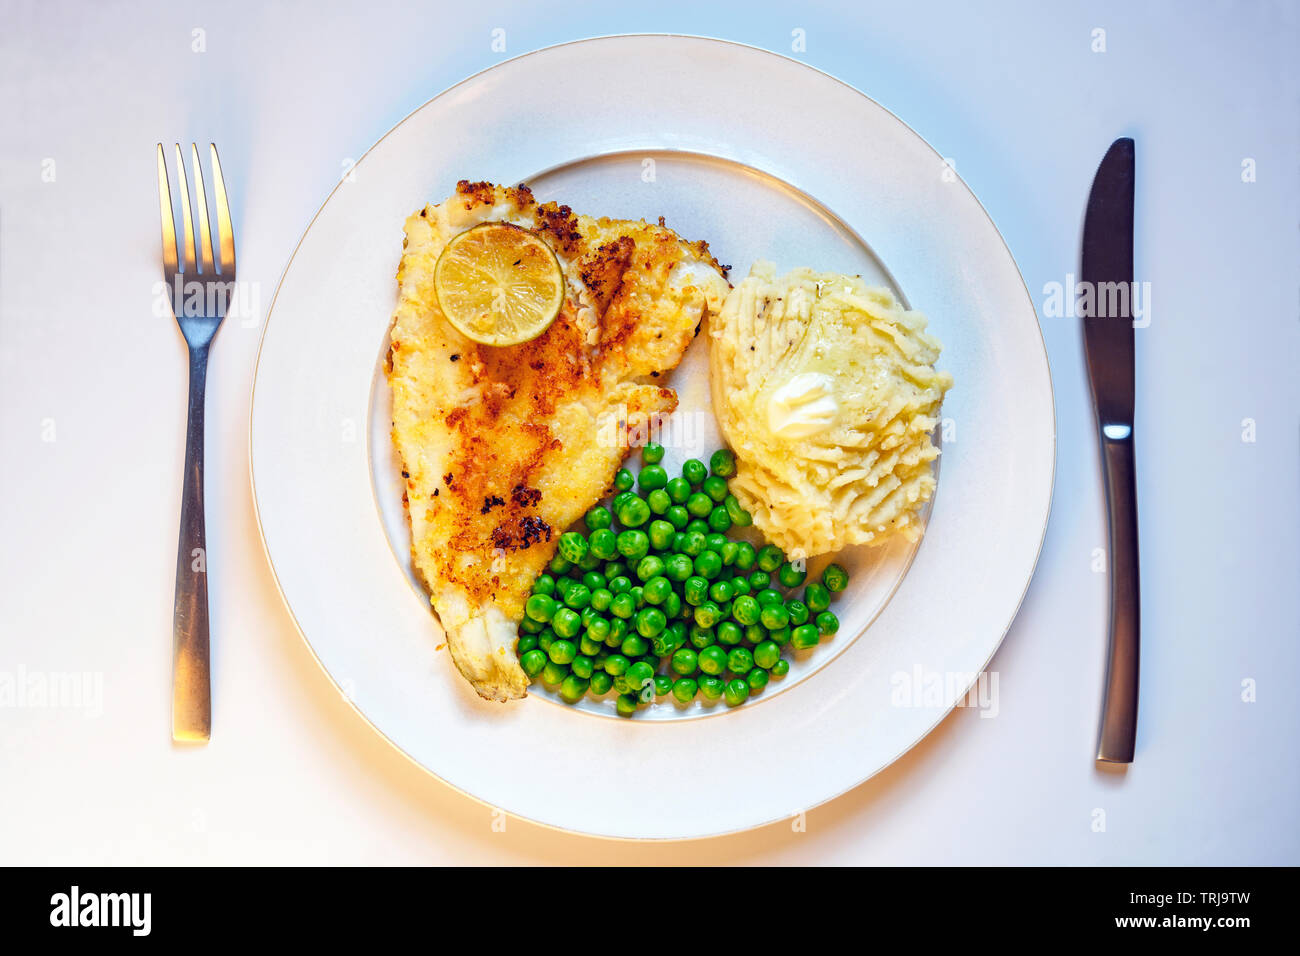 Sea Bass with garden peas and mashed potatoes Stock Photo